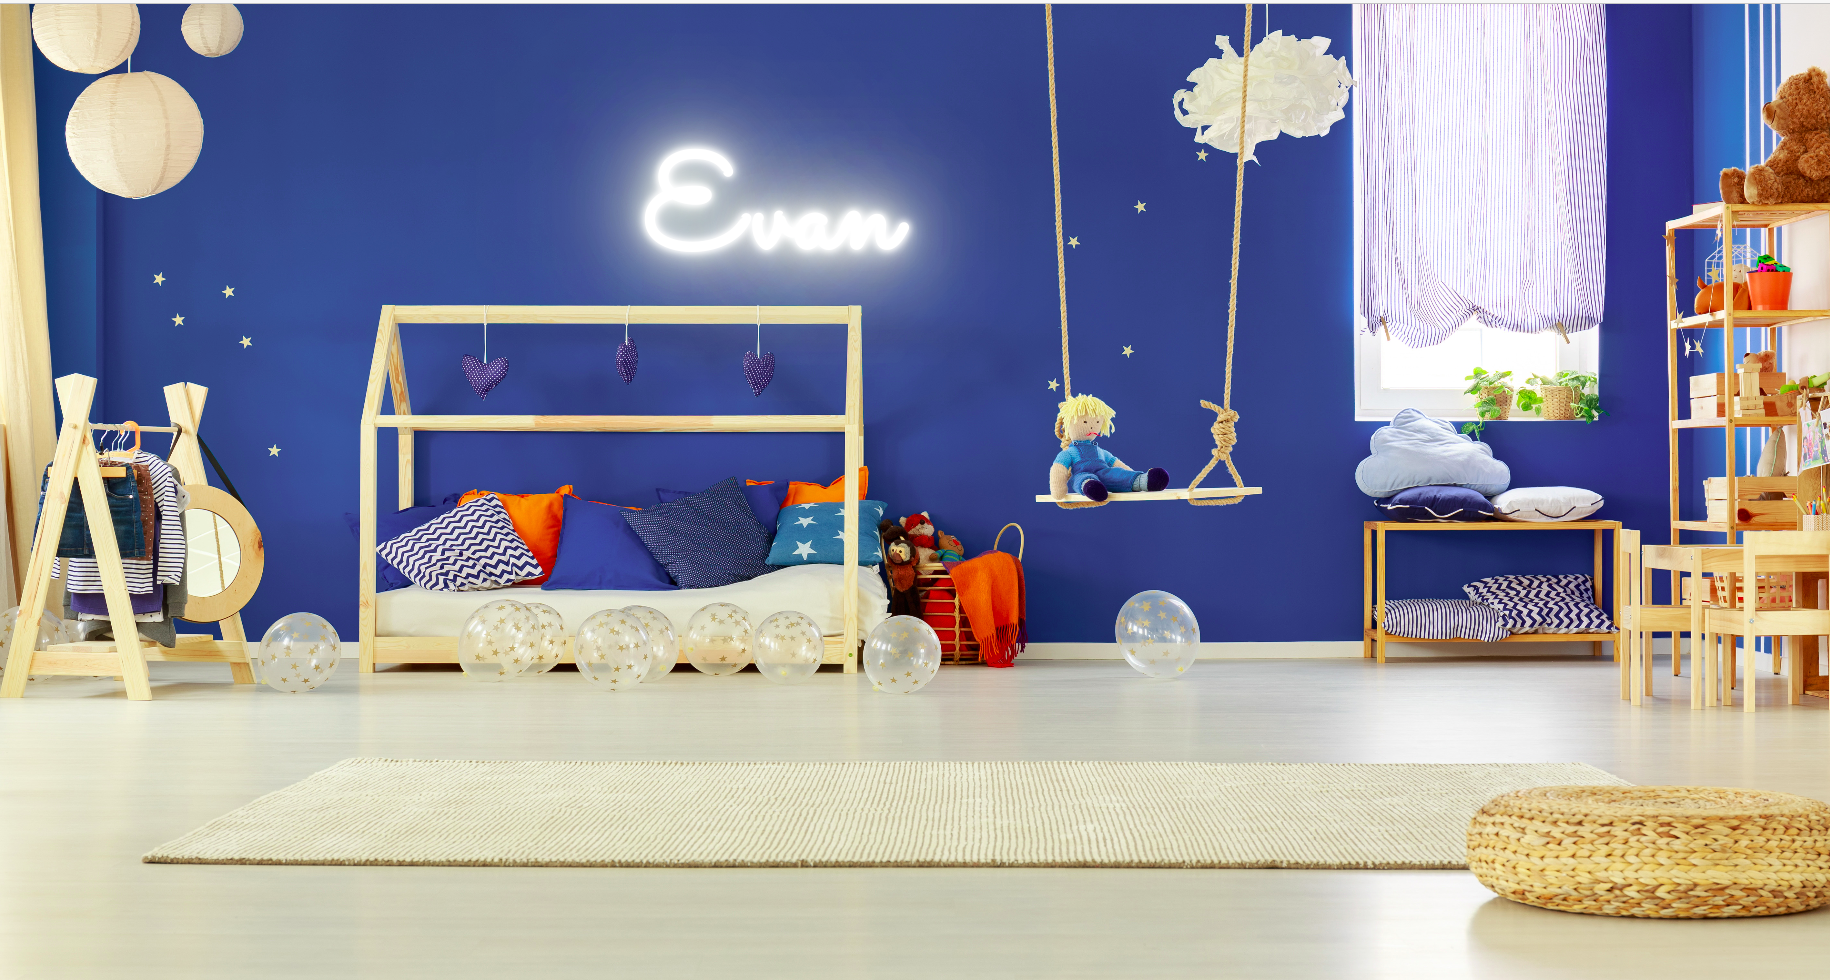 "Evan " Baby Name LED Neon Sign